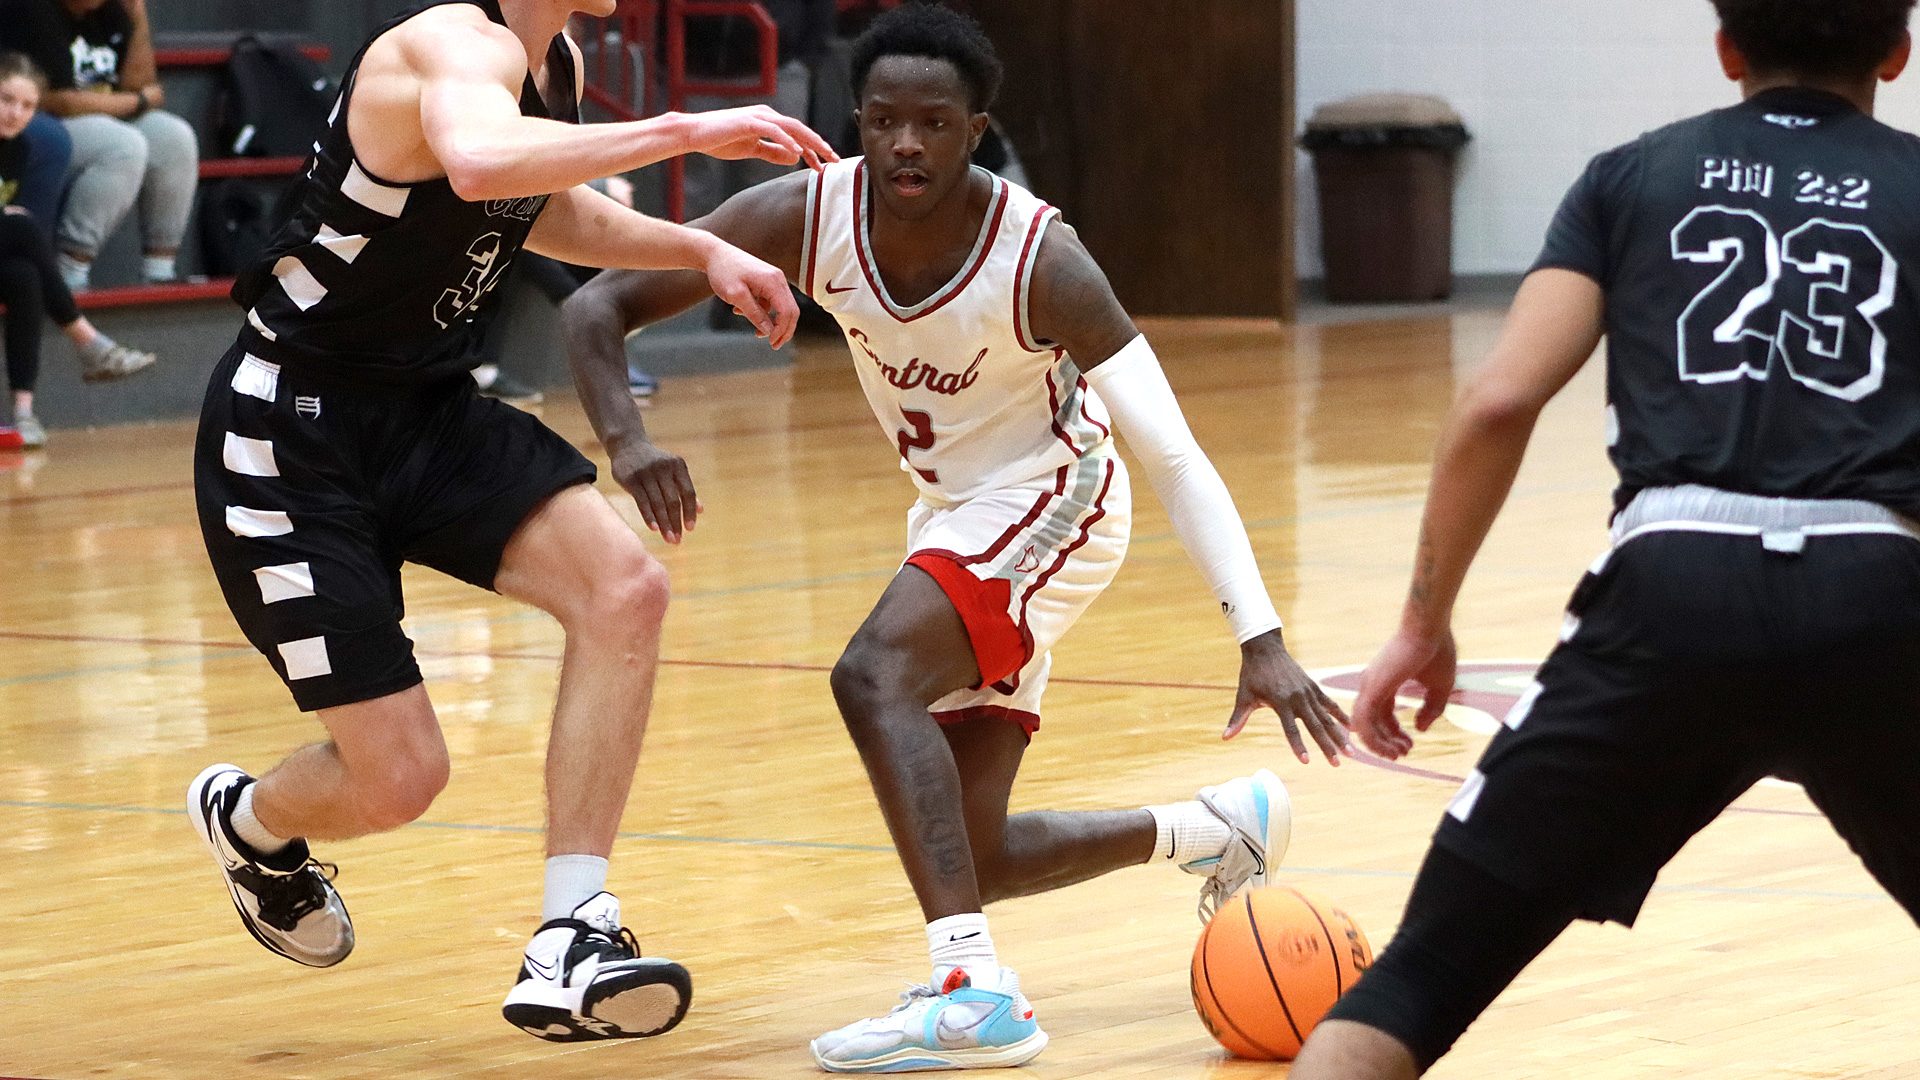 CCCB junior Ayris Abdelnassar scored a career-high 37 points on Saturday during the Saints' 104-91 victory over Barclay College in the fifth place game of the MCCC Tournament.